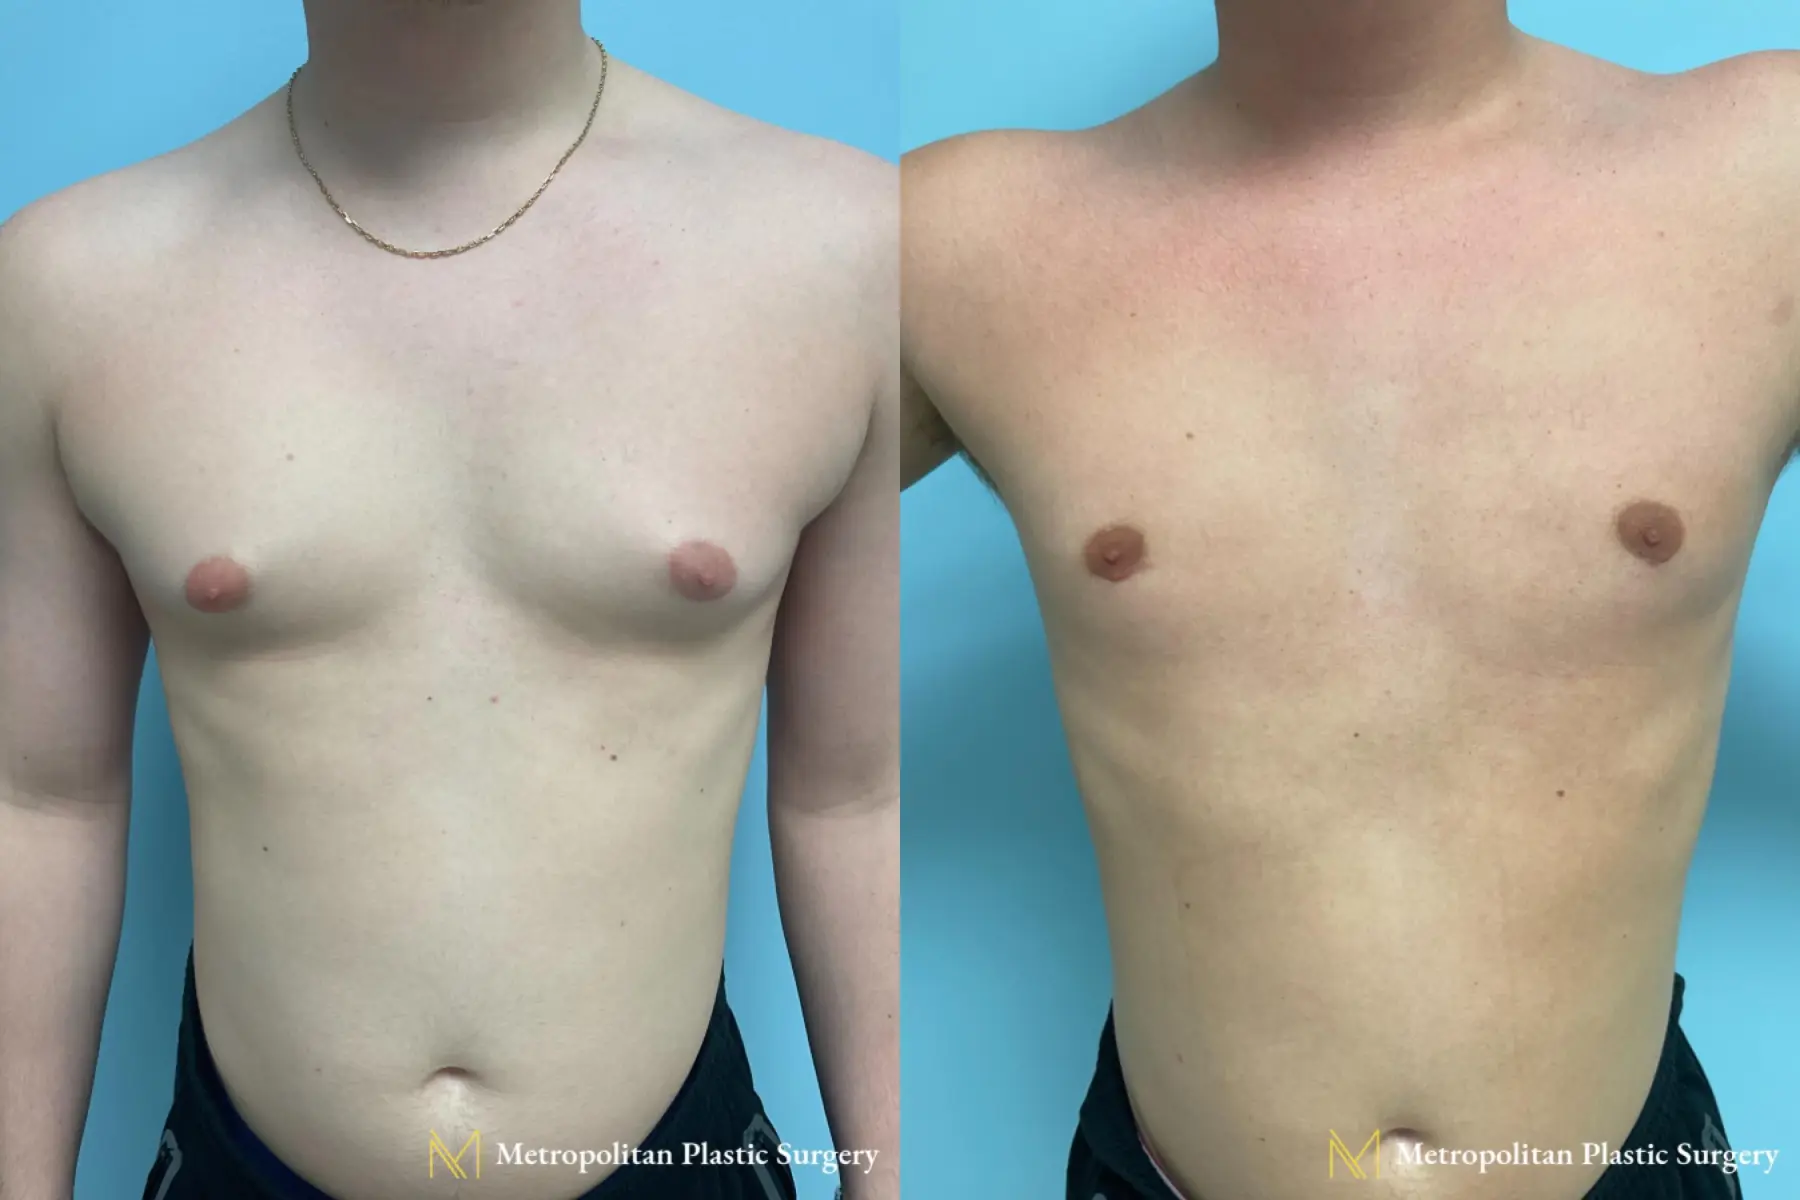 Reduce Male Breast Size with Gynecomastia by board certified Julia Spears MD, Metropolitan Plastic Surgery - Before and After